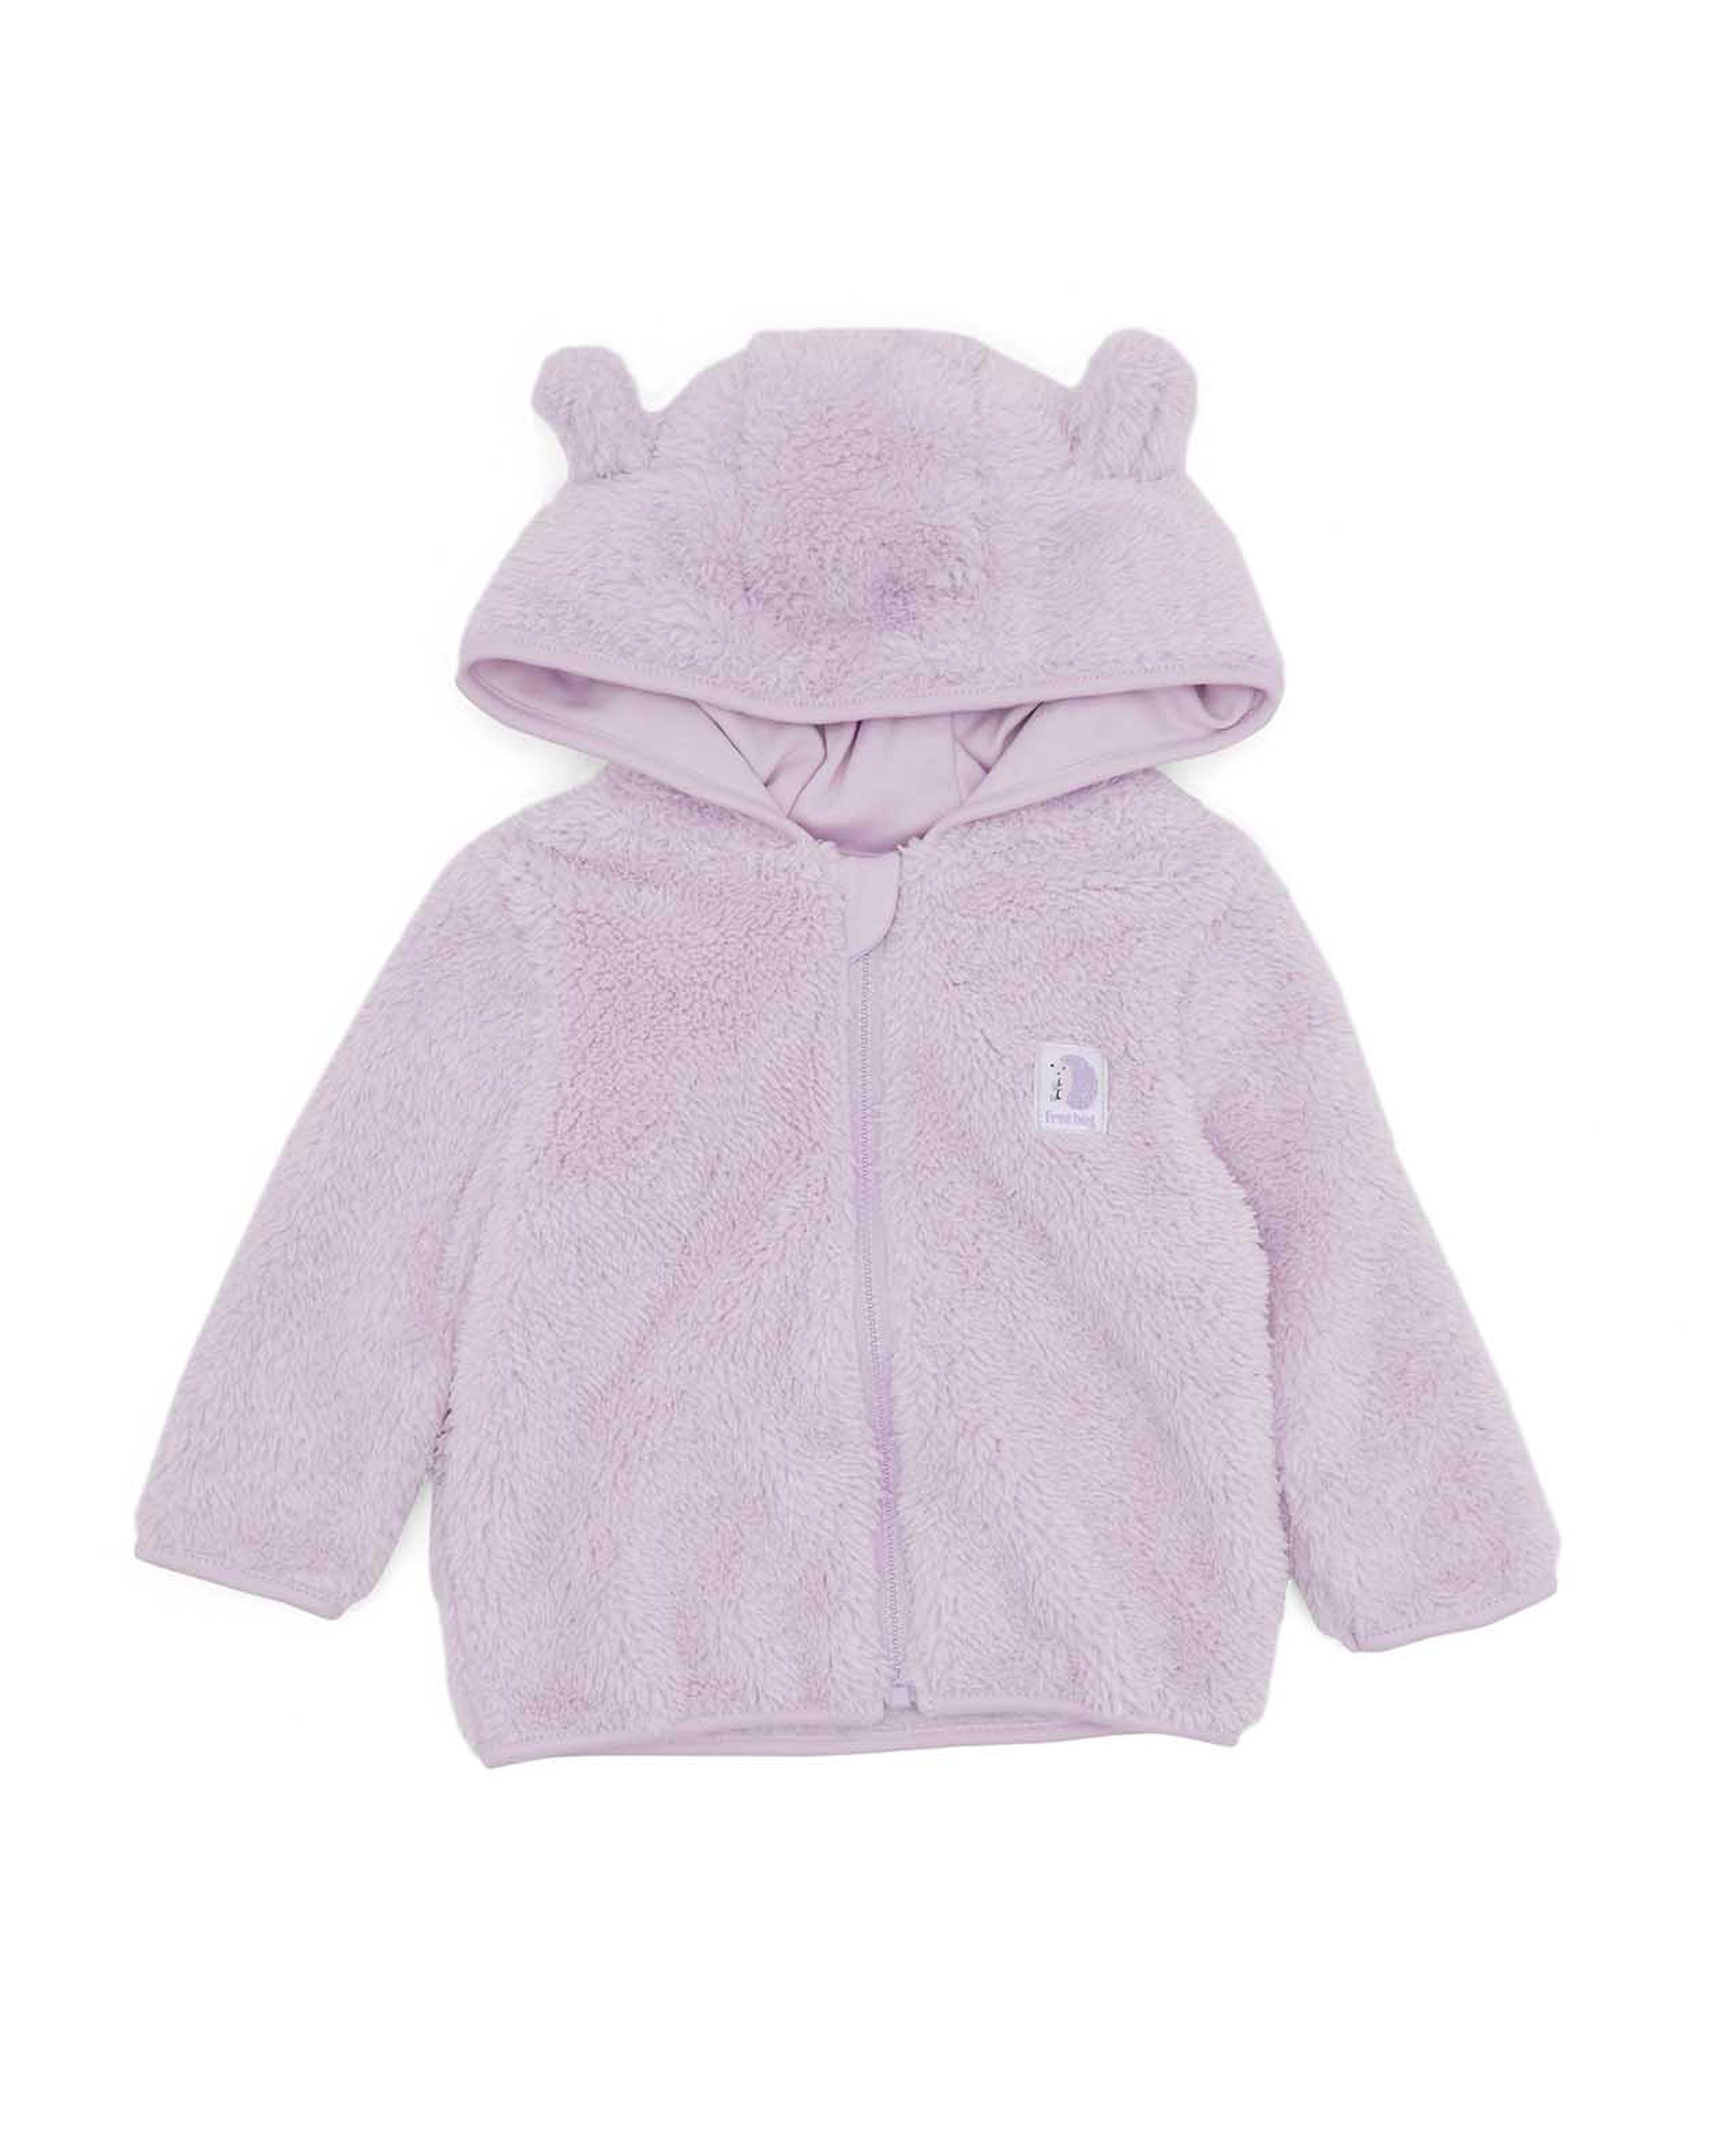 Plush Hooded Jacket with Zipper Closure